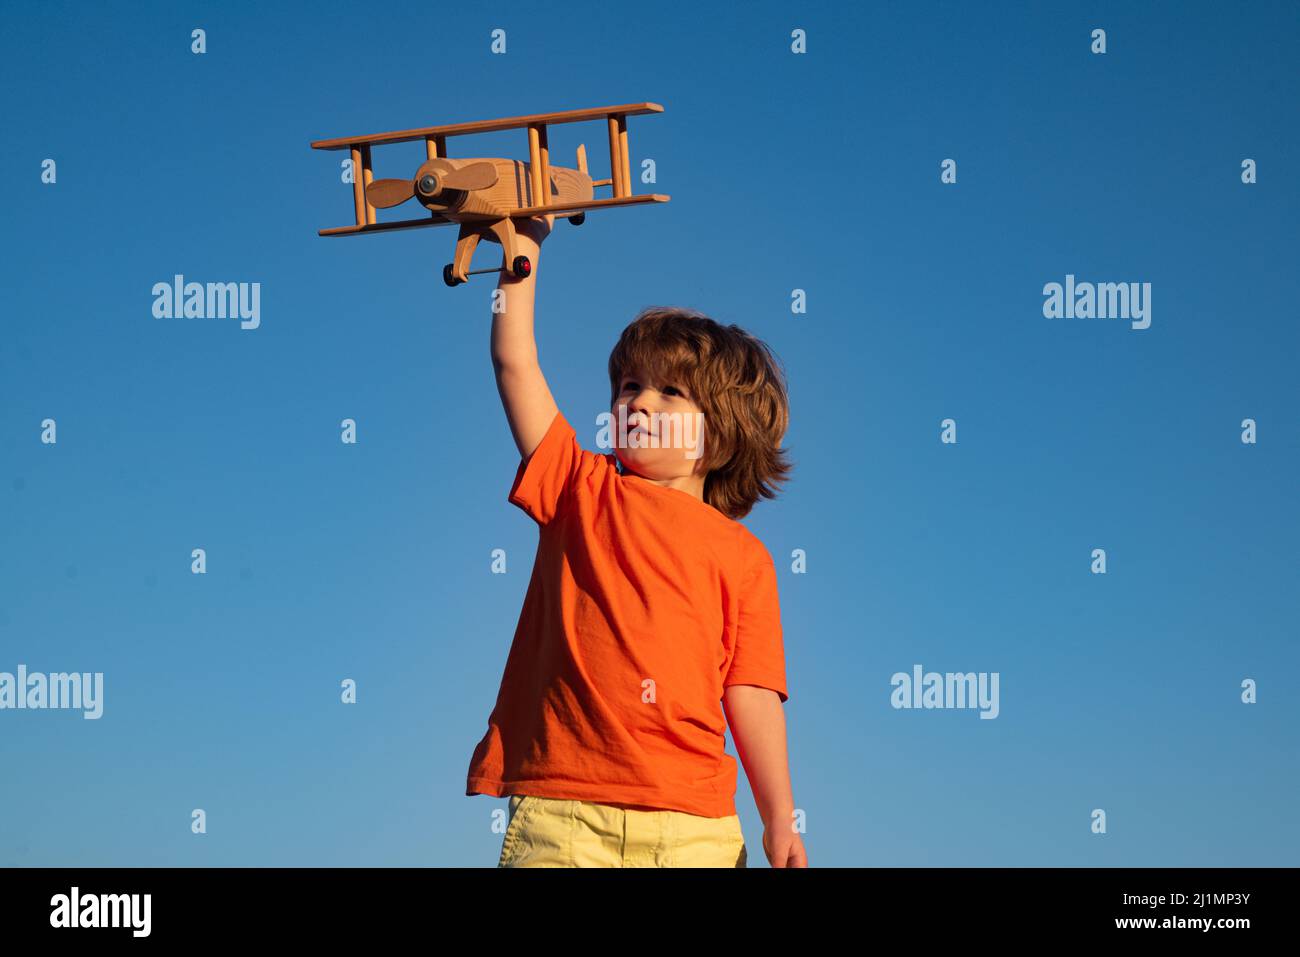 Child boy 7 year old playing with wooden toy airplane, dream of becoming a pilot. Childrens dreams. Child pilot aviator with wooden plane. Stock Photo